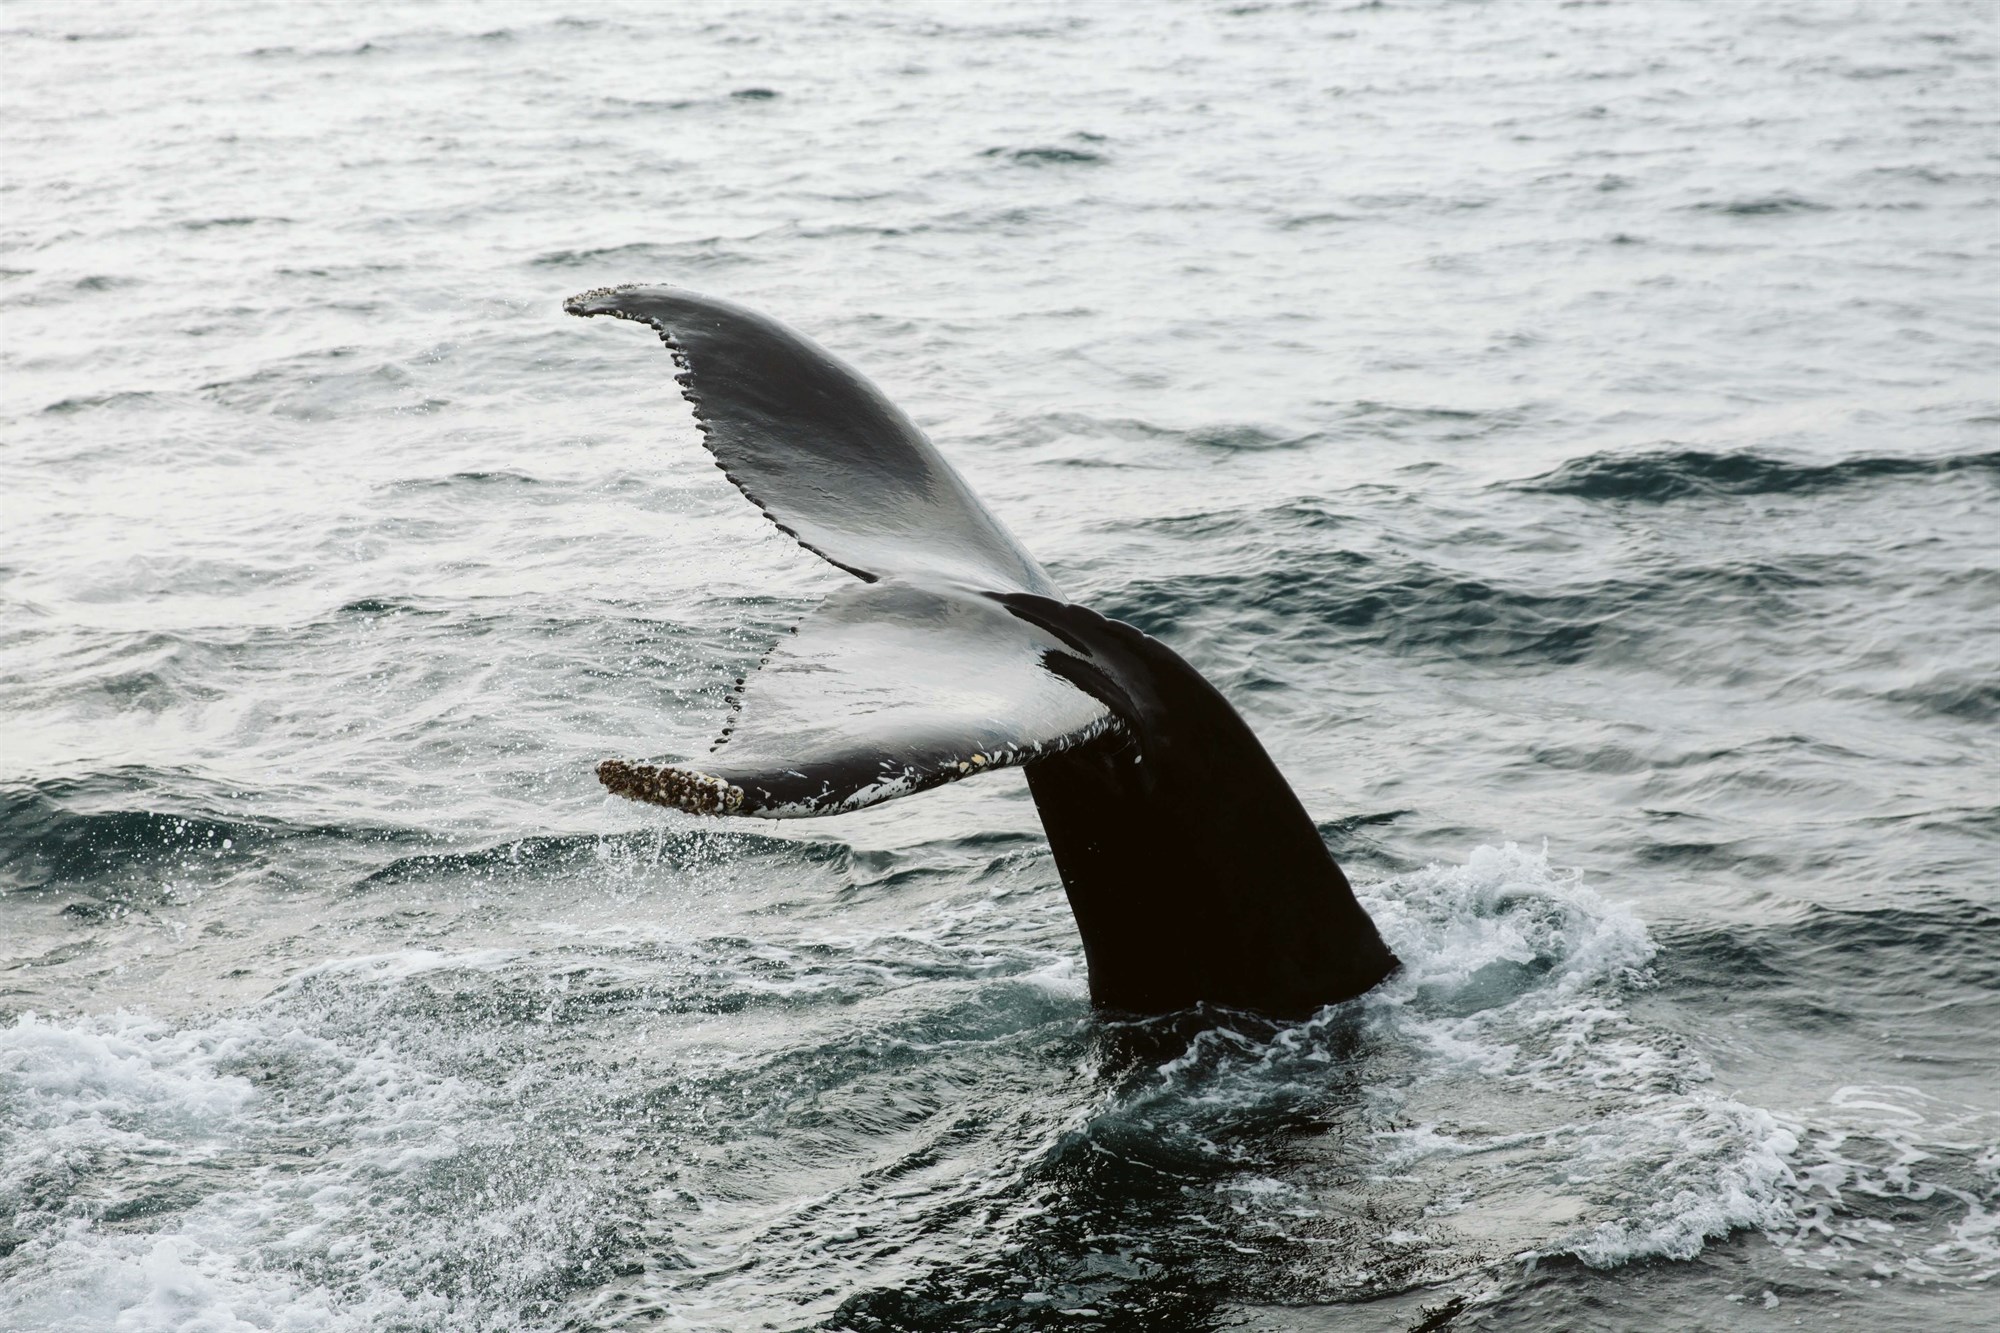 Whale's tail emerging from water in Hauganes, Iceland